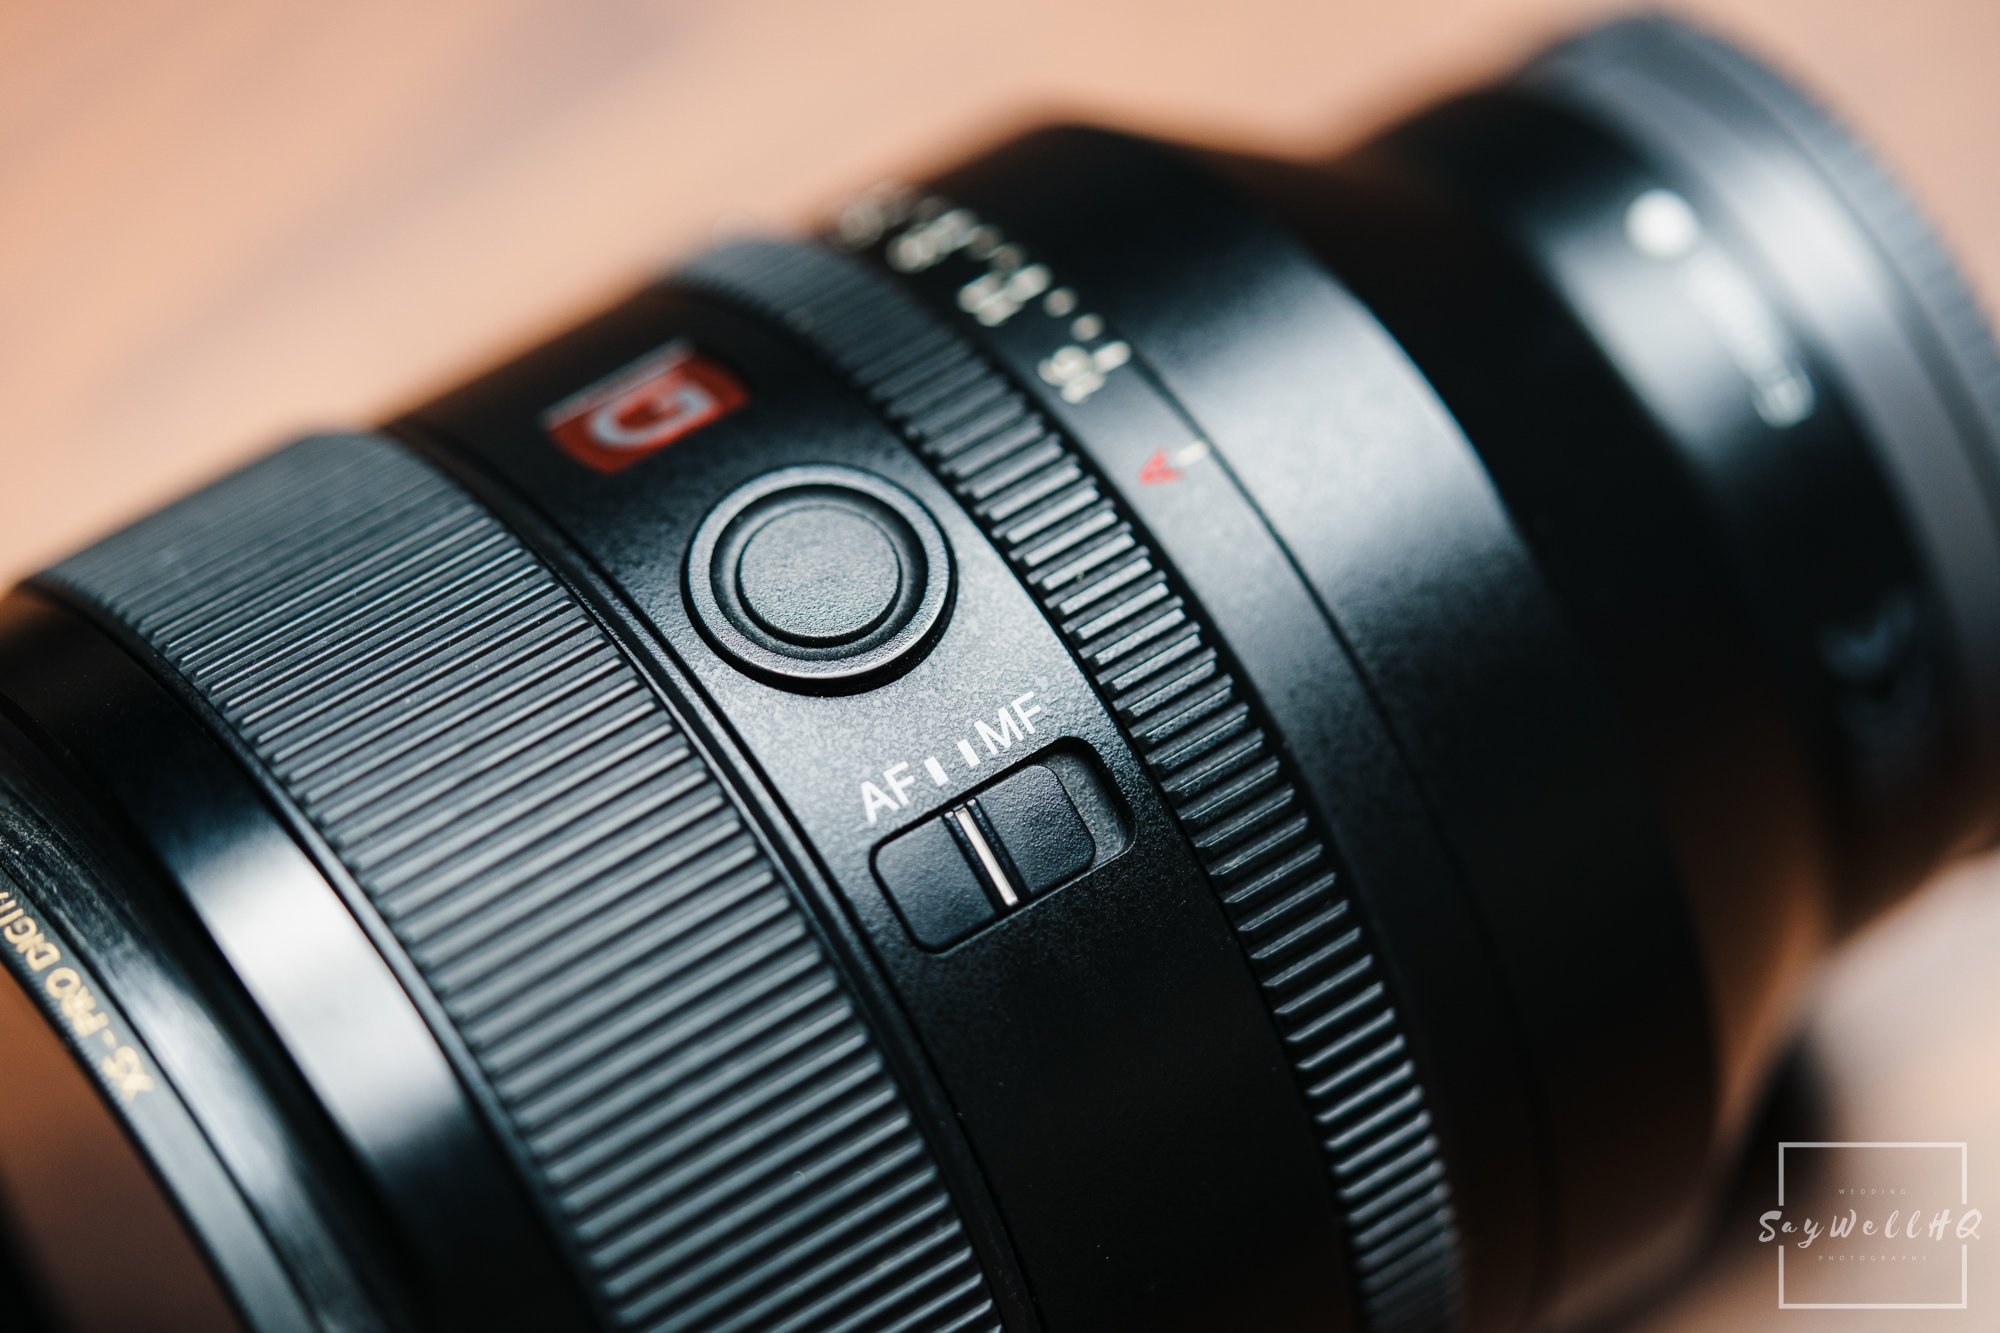  The AF / MF Toggle Button Within Easy Reach On The Lens 